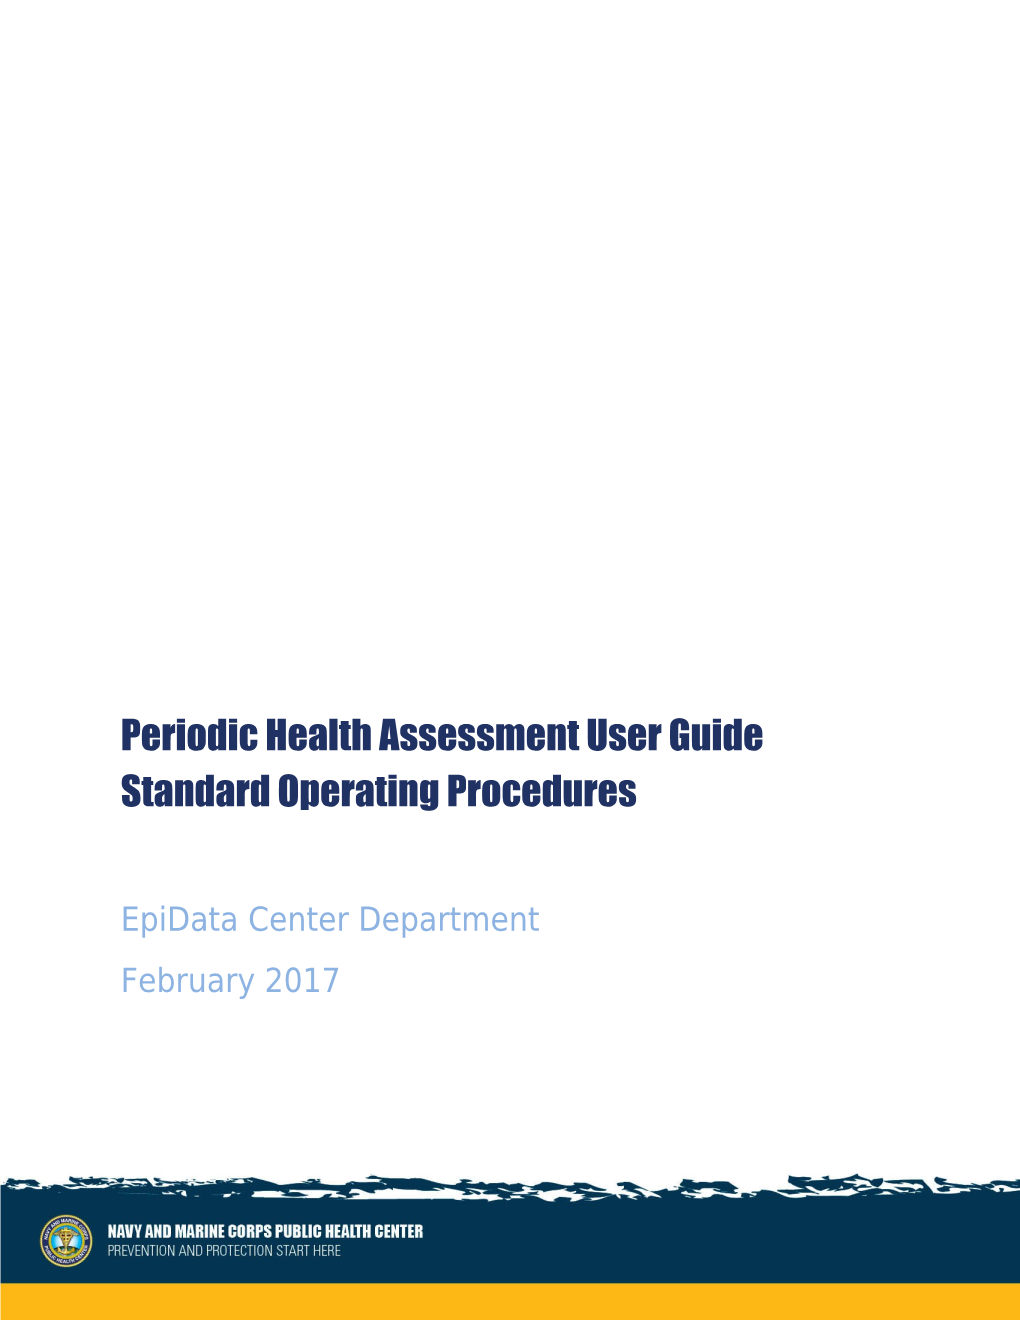 Periodic Health Assessment User Guide Standard Operating Procedures